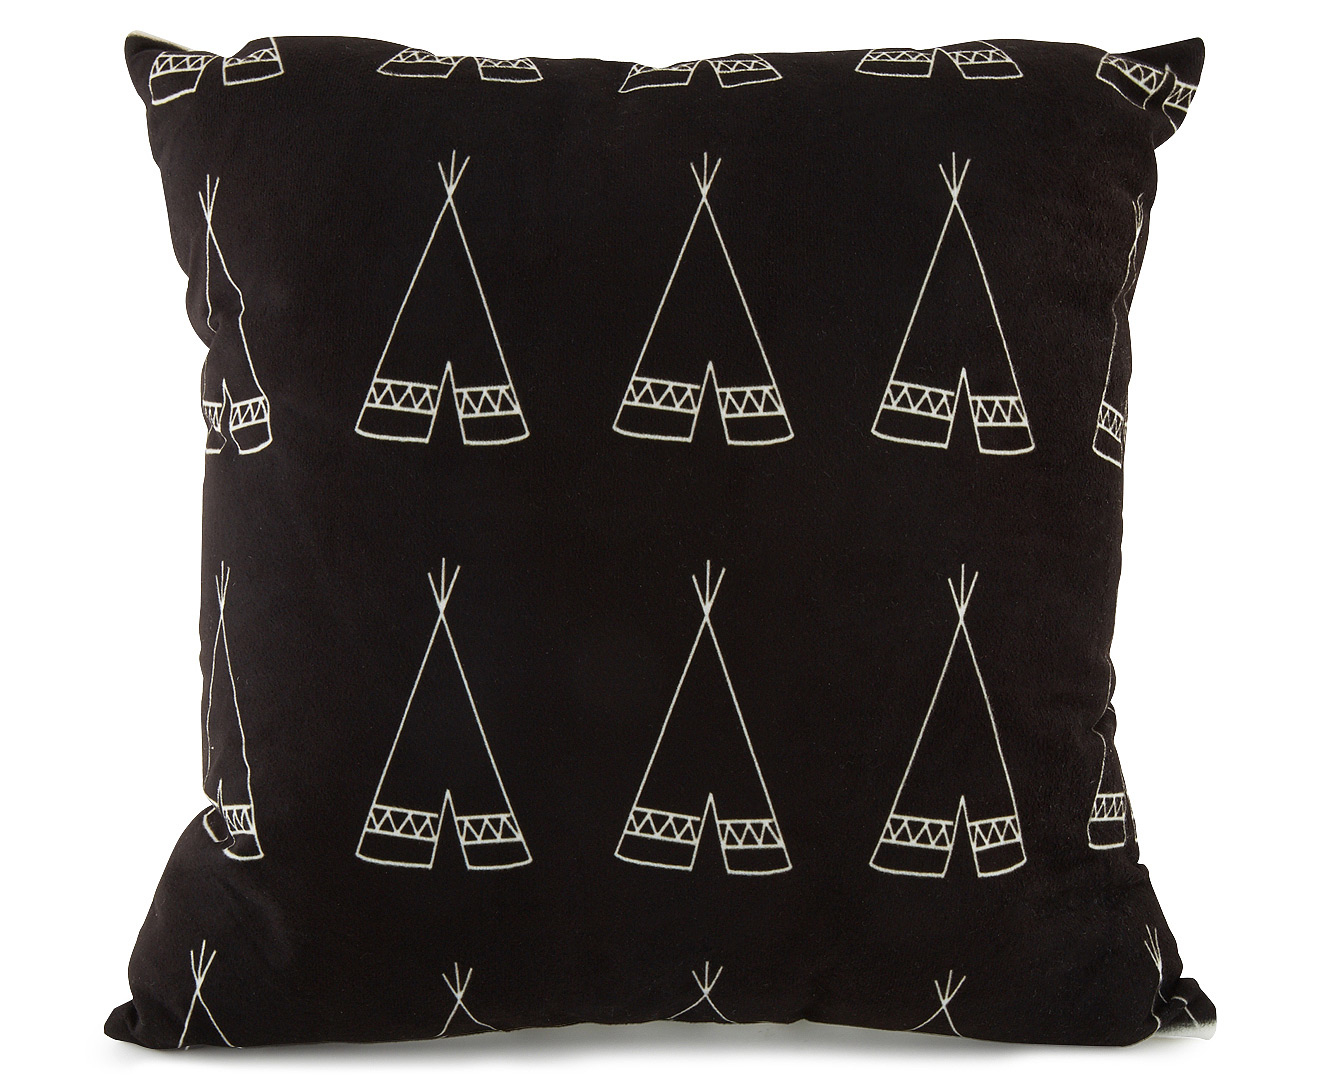 Kids Concepts Teepee Square Pillow - Black/White